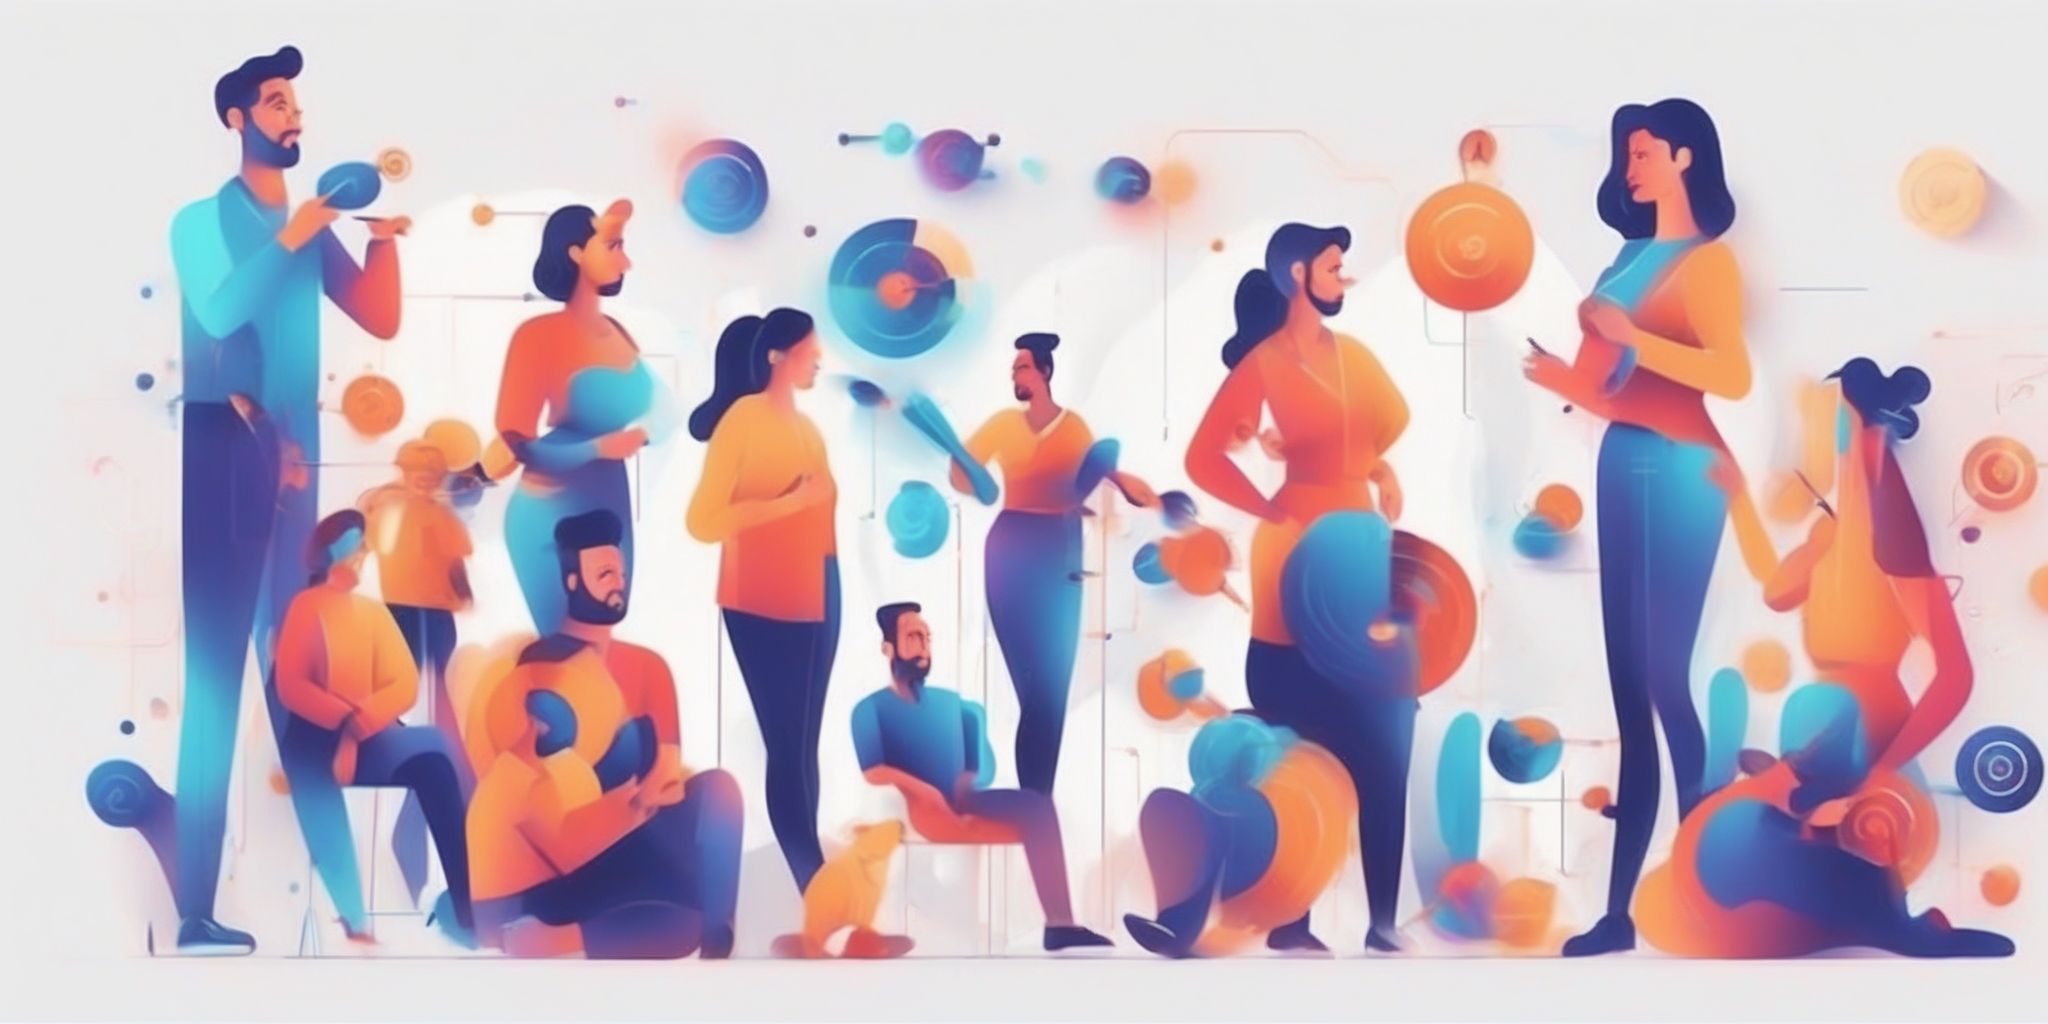 target audience in illustration style with gradients and white background